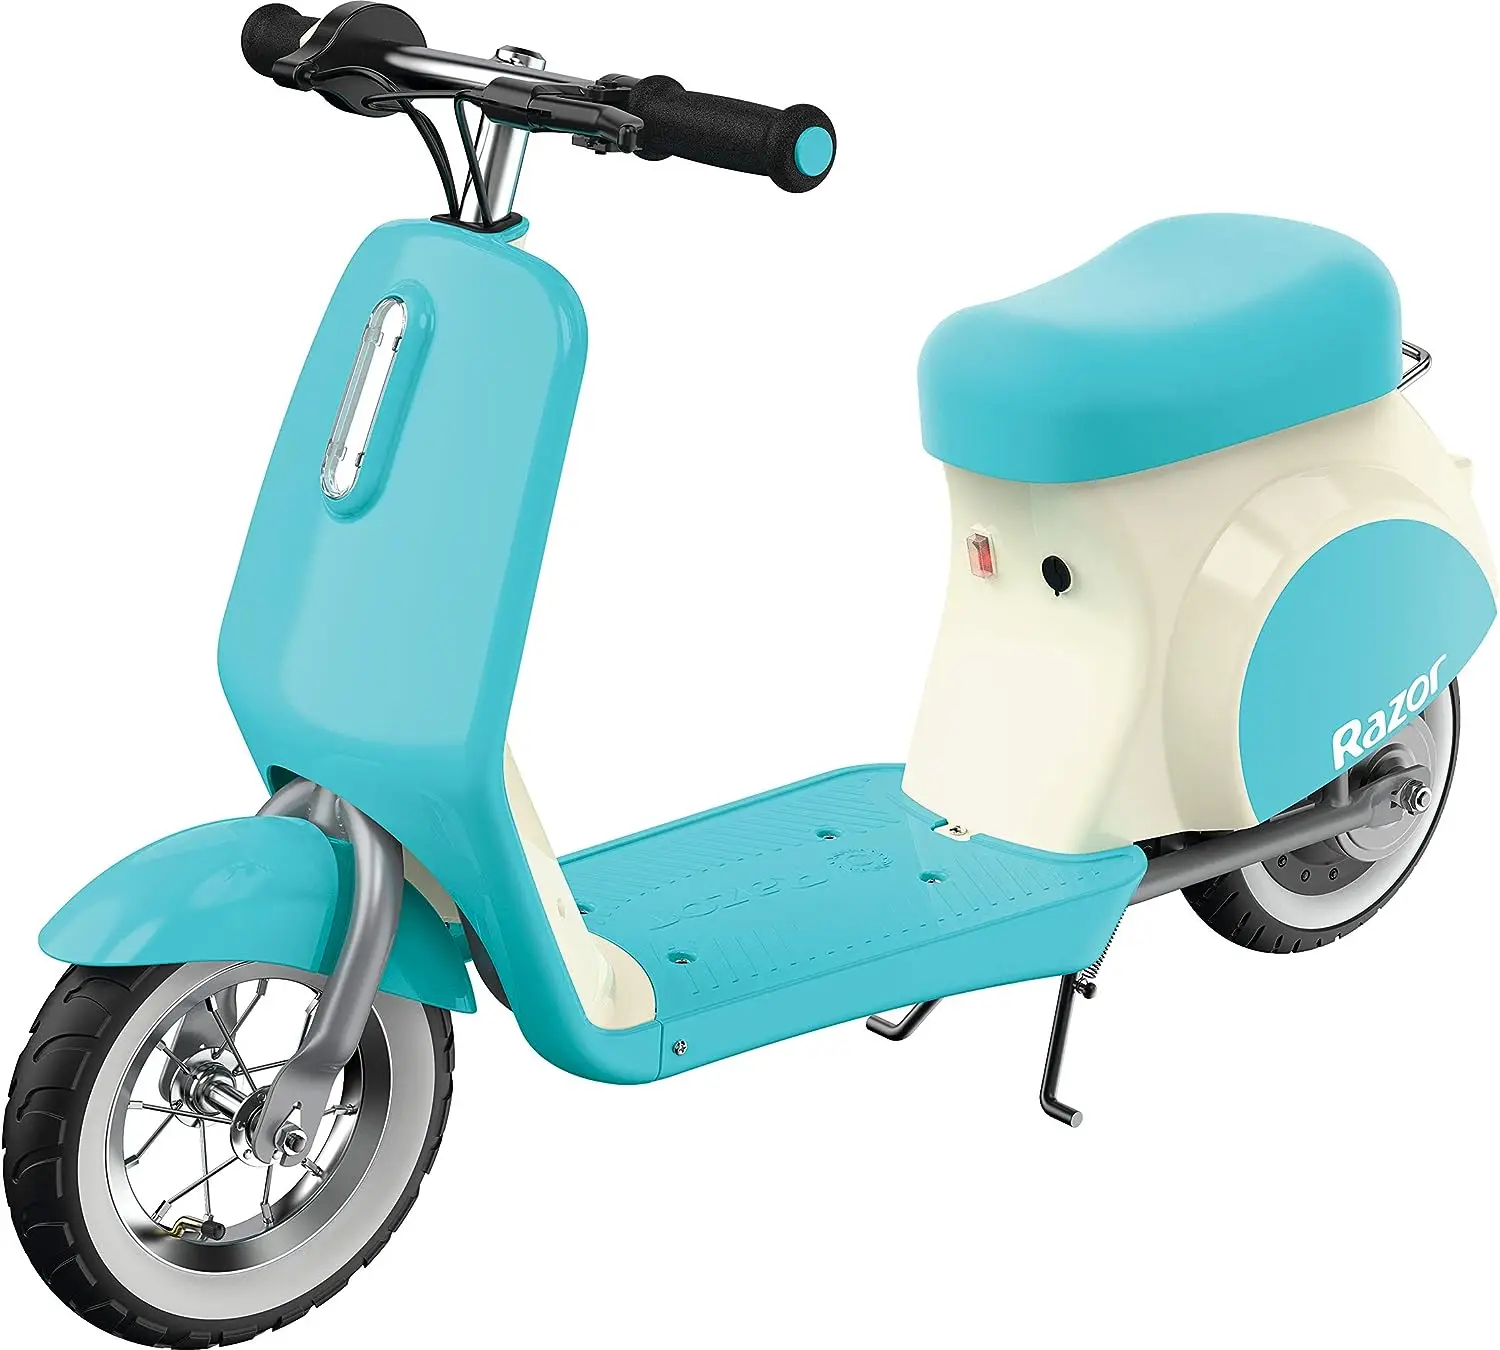 

Mod Petite Miniature Euro-Style Scooter for Ages 7+, Vintage-Inspired Design, Hub-Driven Motor, Pneumatic White Tires, Up to 4